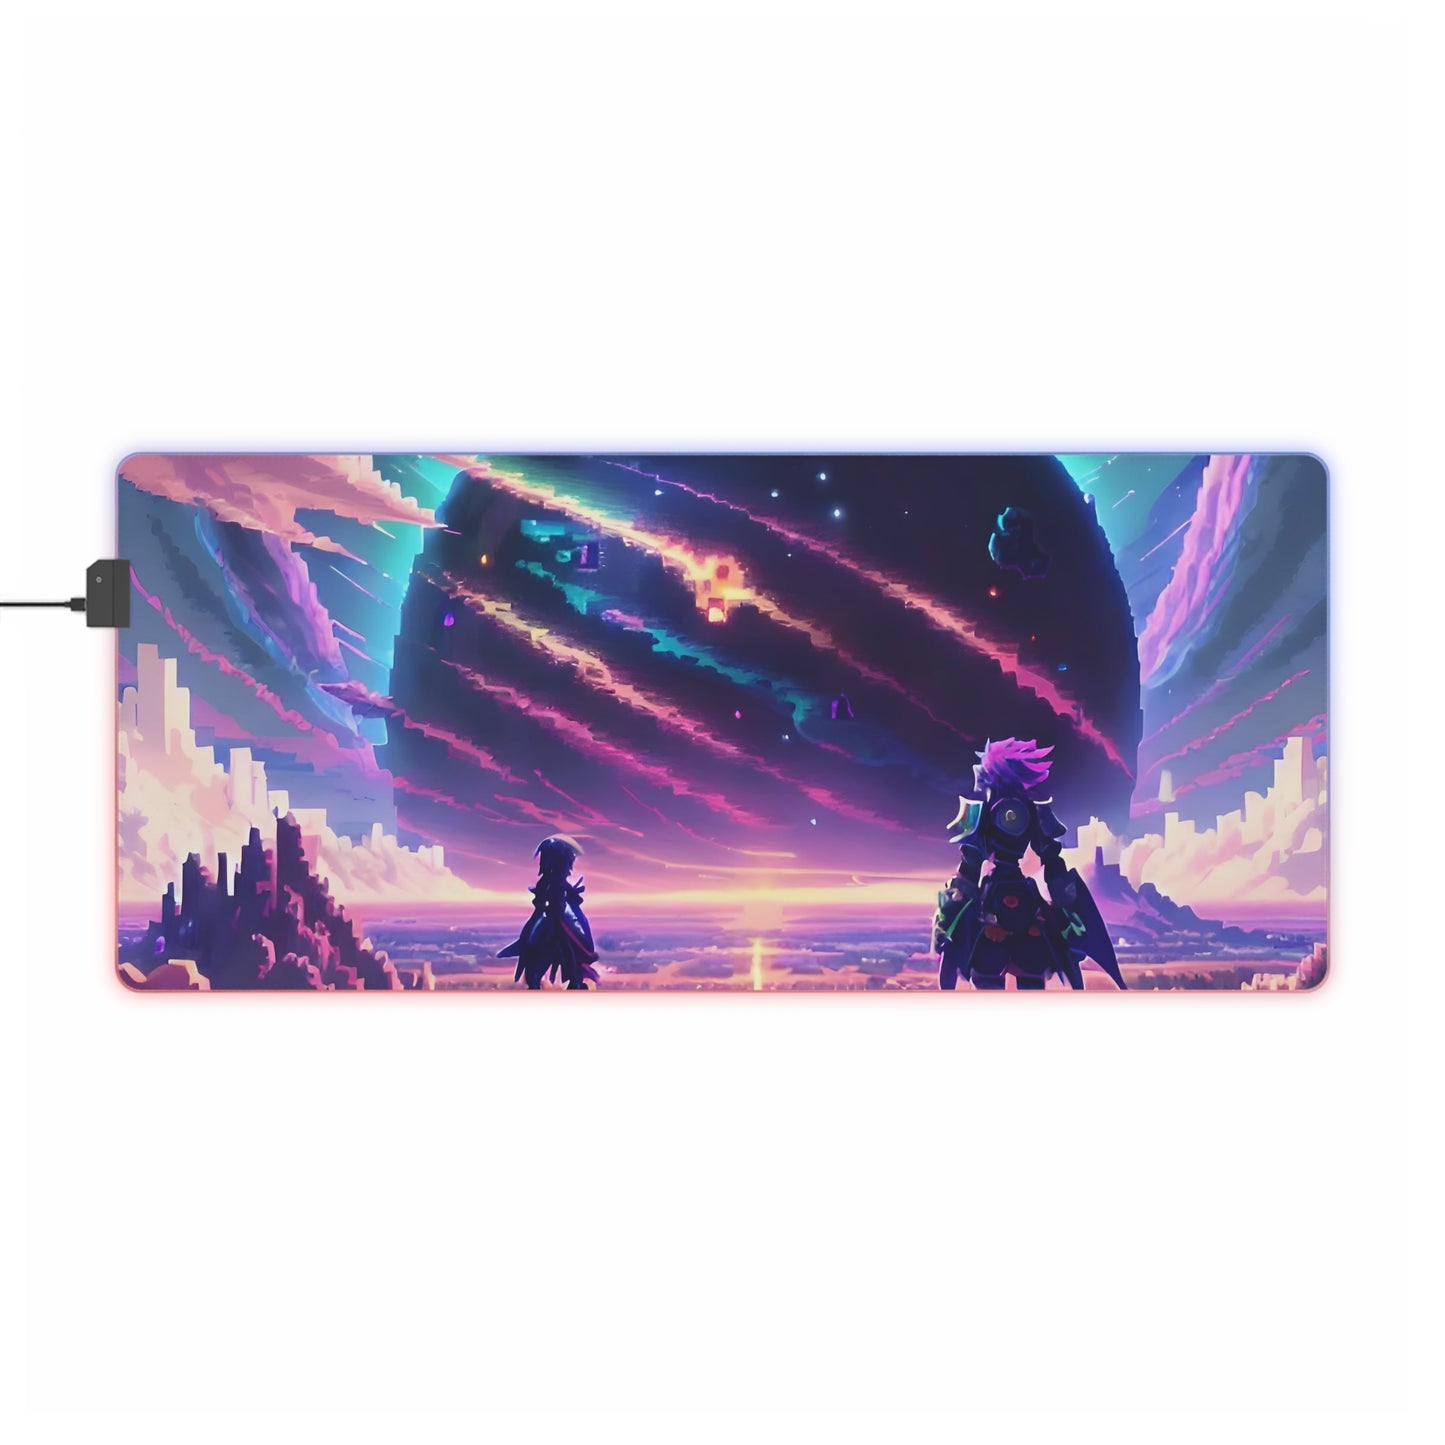 Heroes journey LED Gaming Mouse Pad